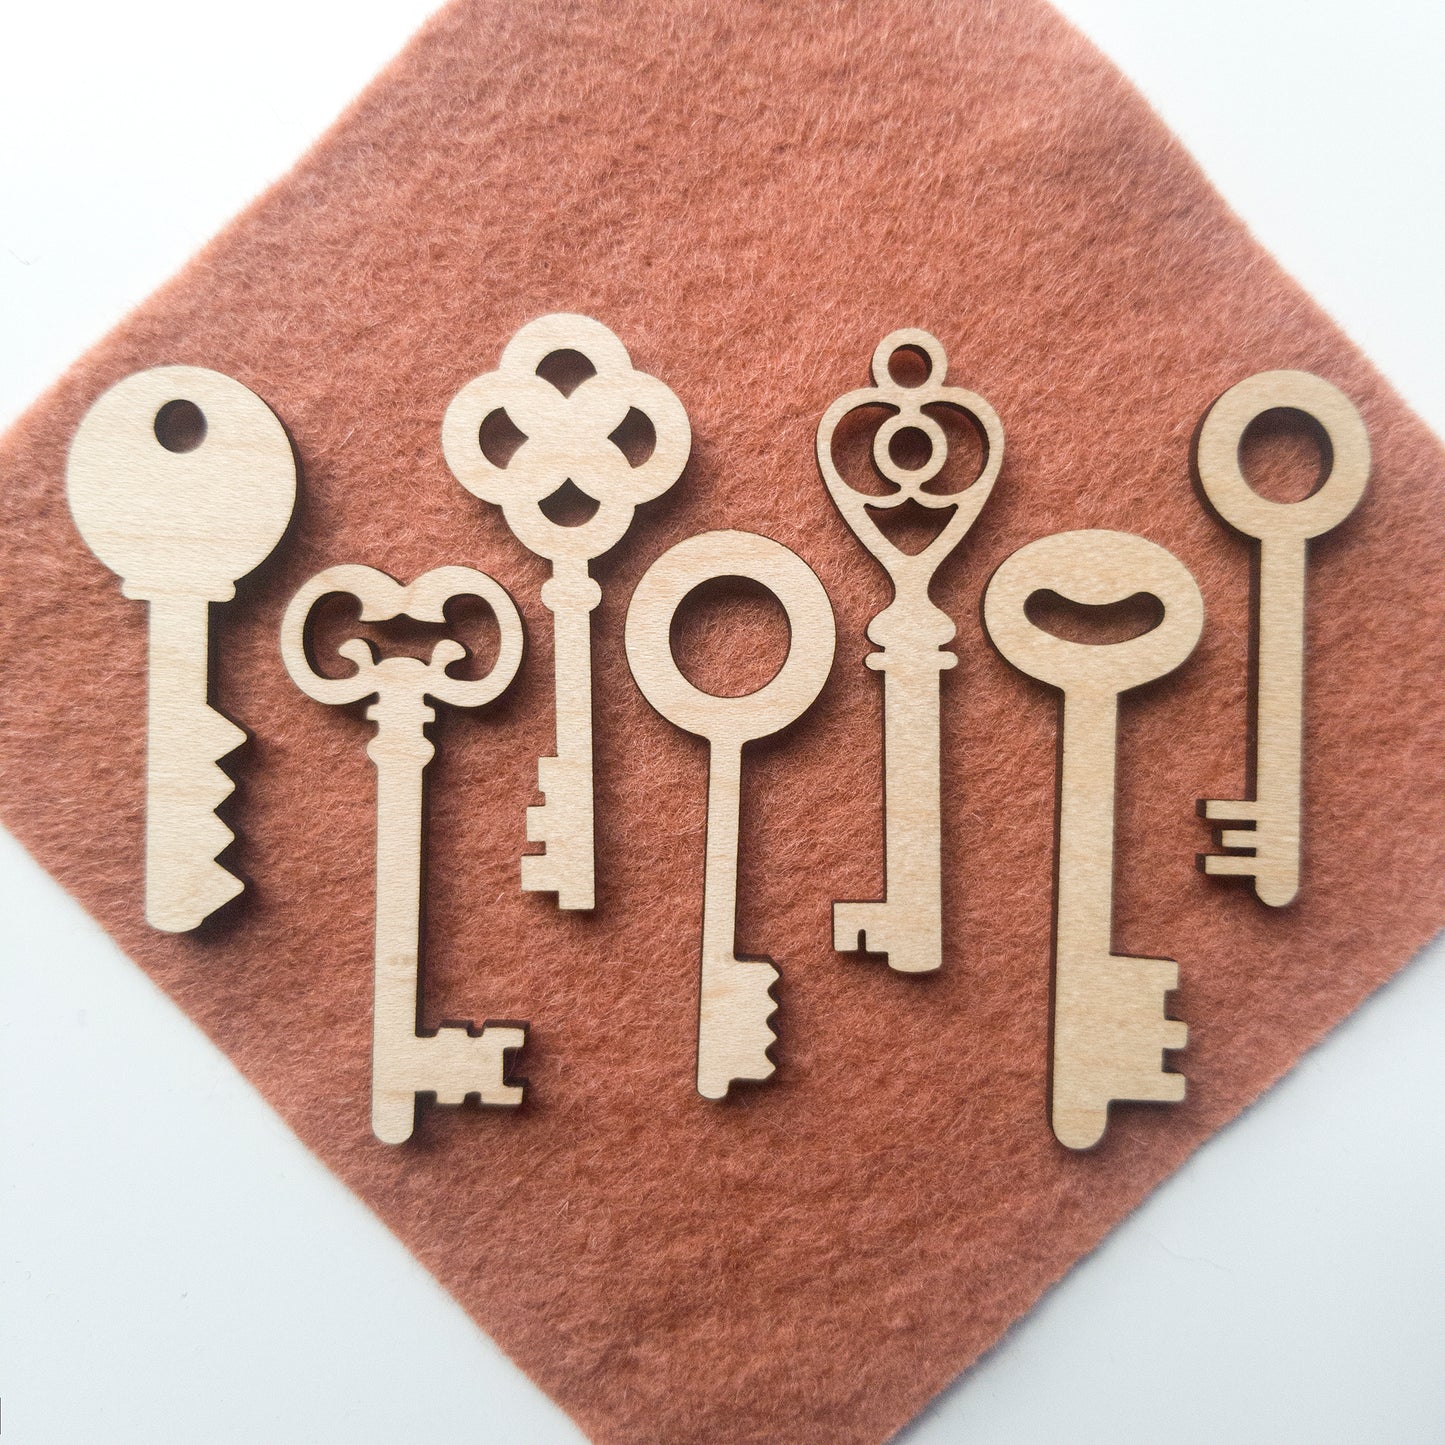 Antique Key Charms (Set of 7)